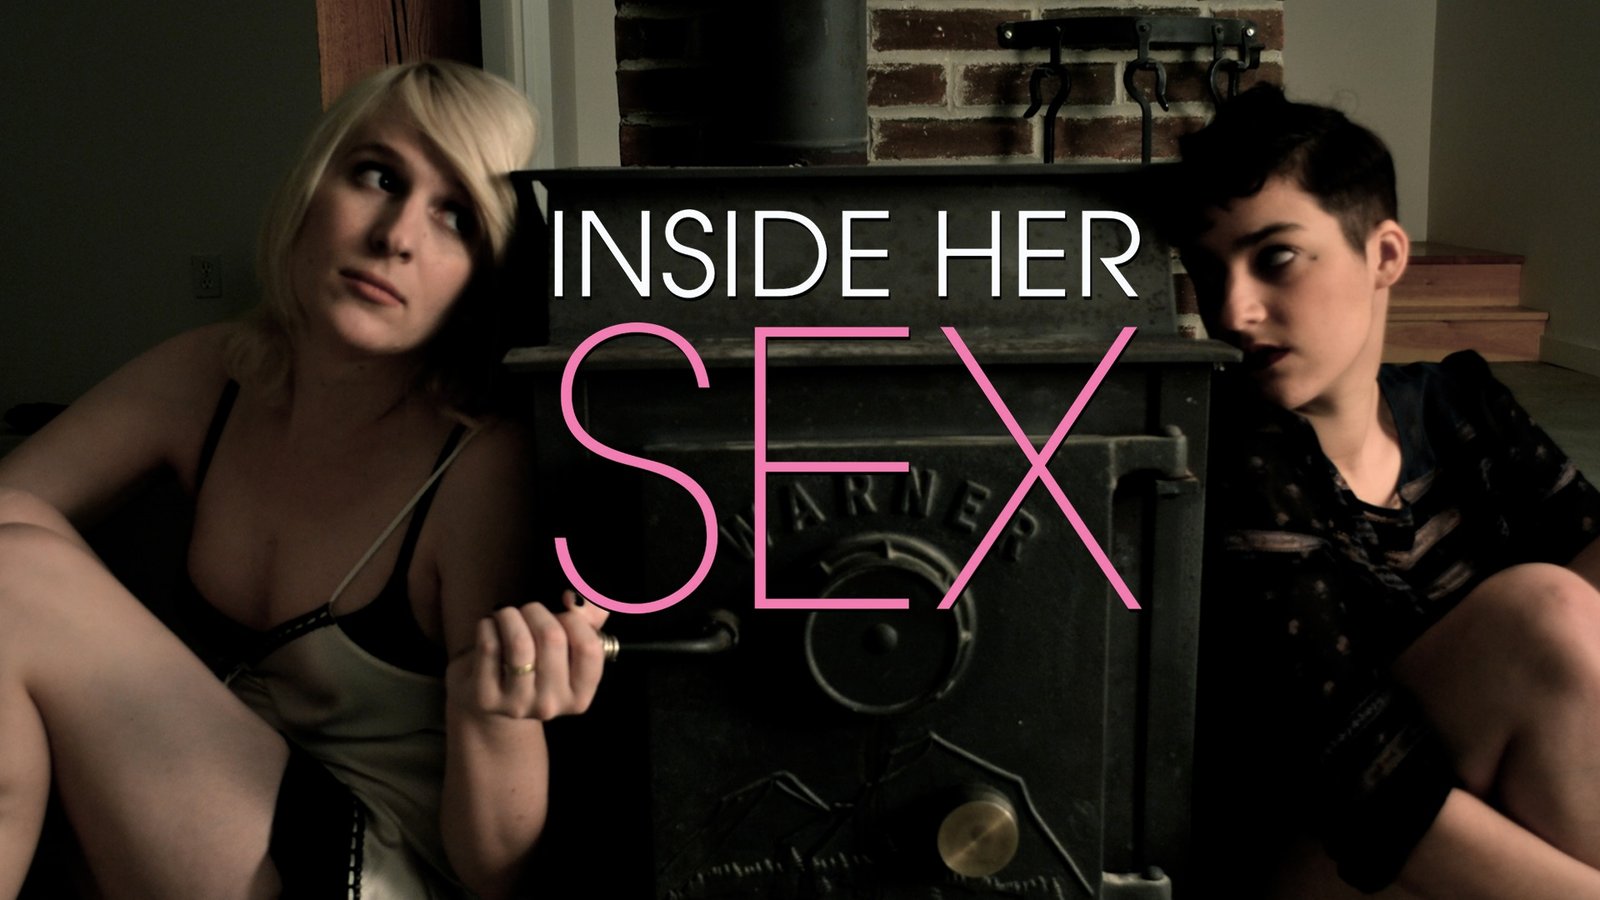 Inside Her Sex - An Exploration of Female Sexuality